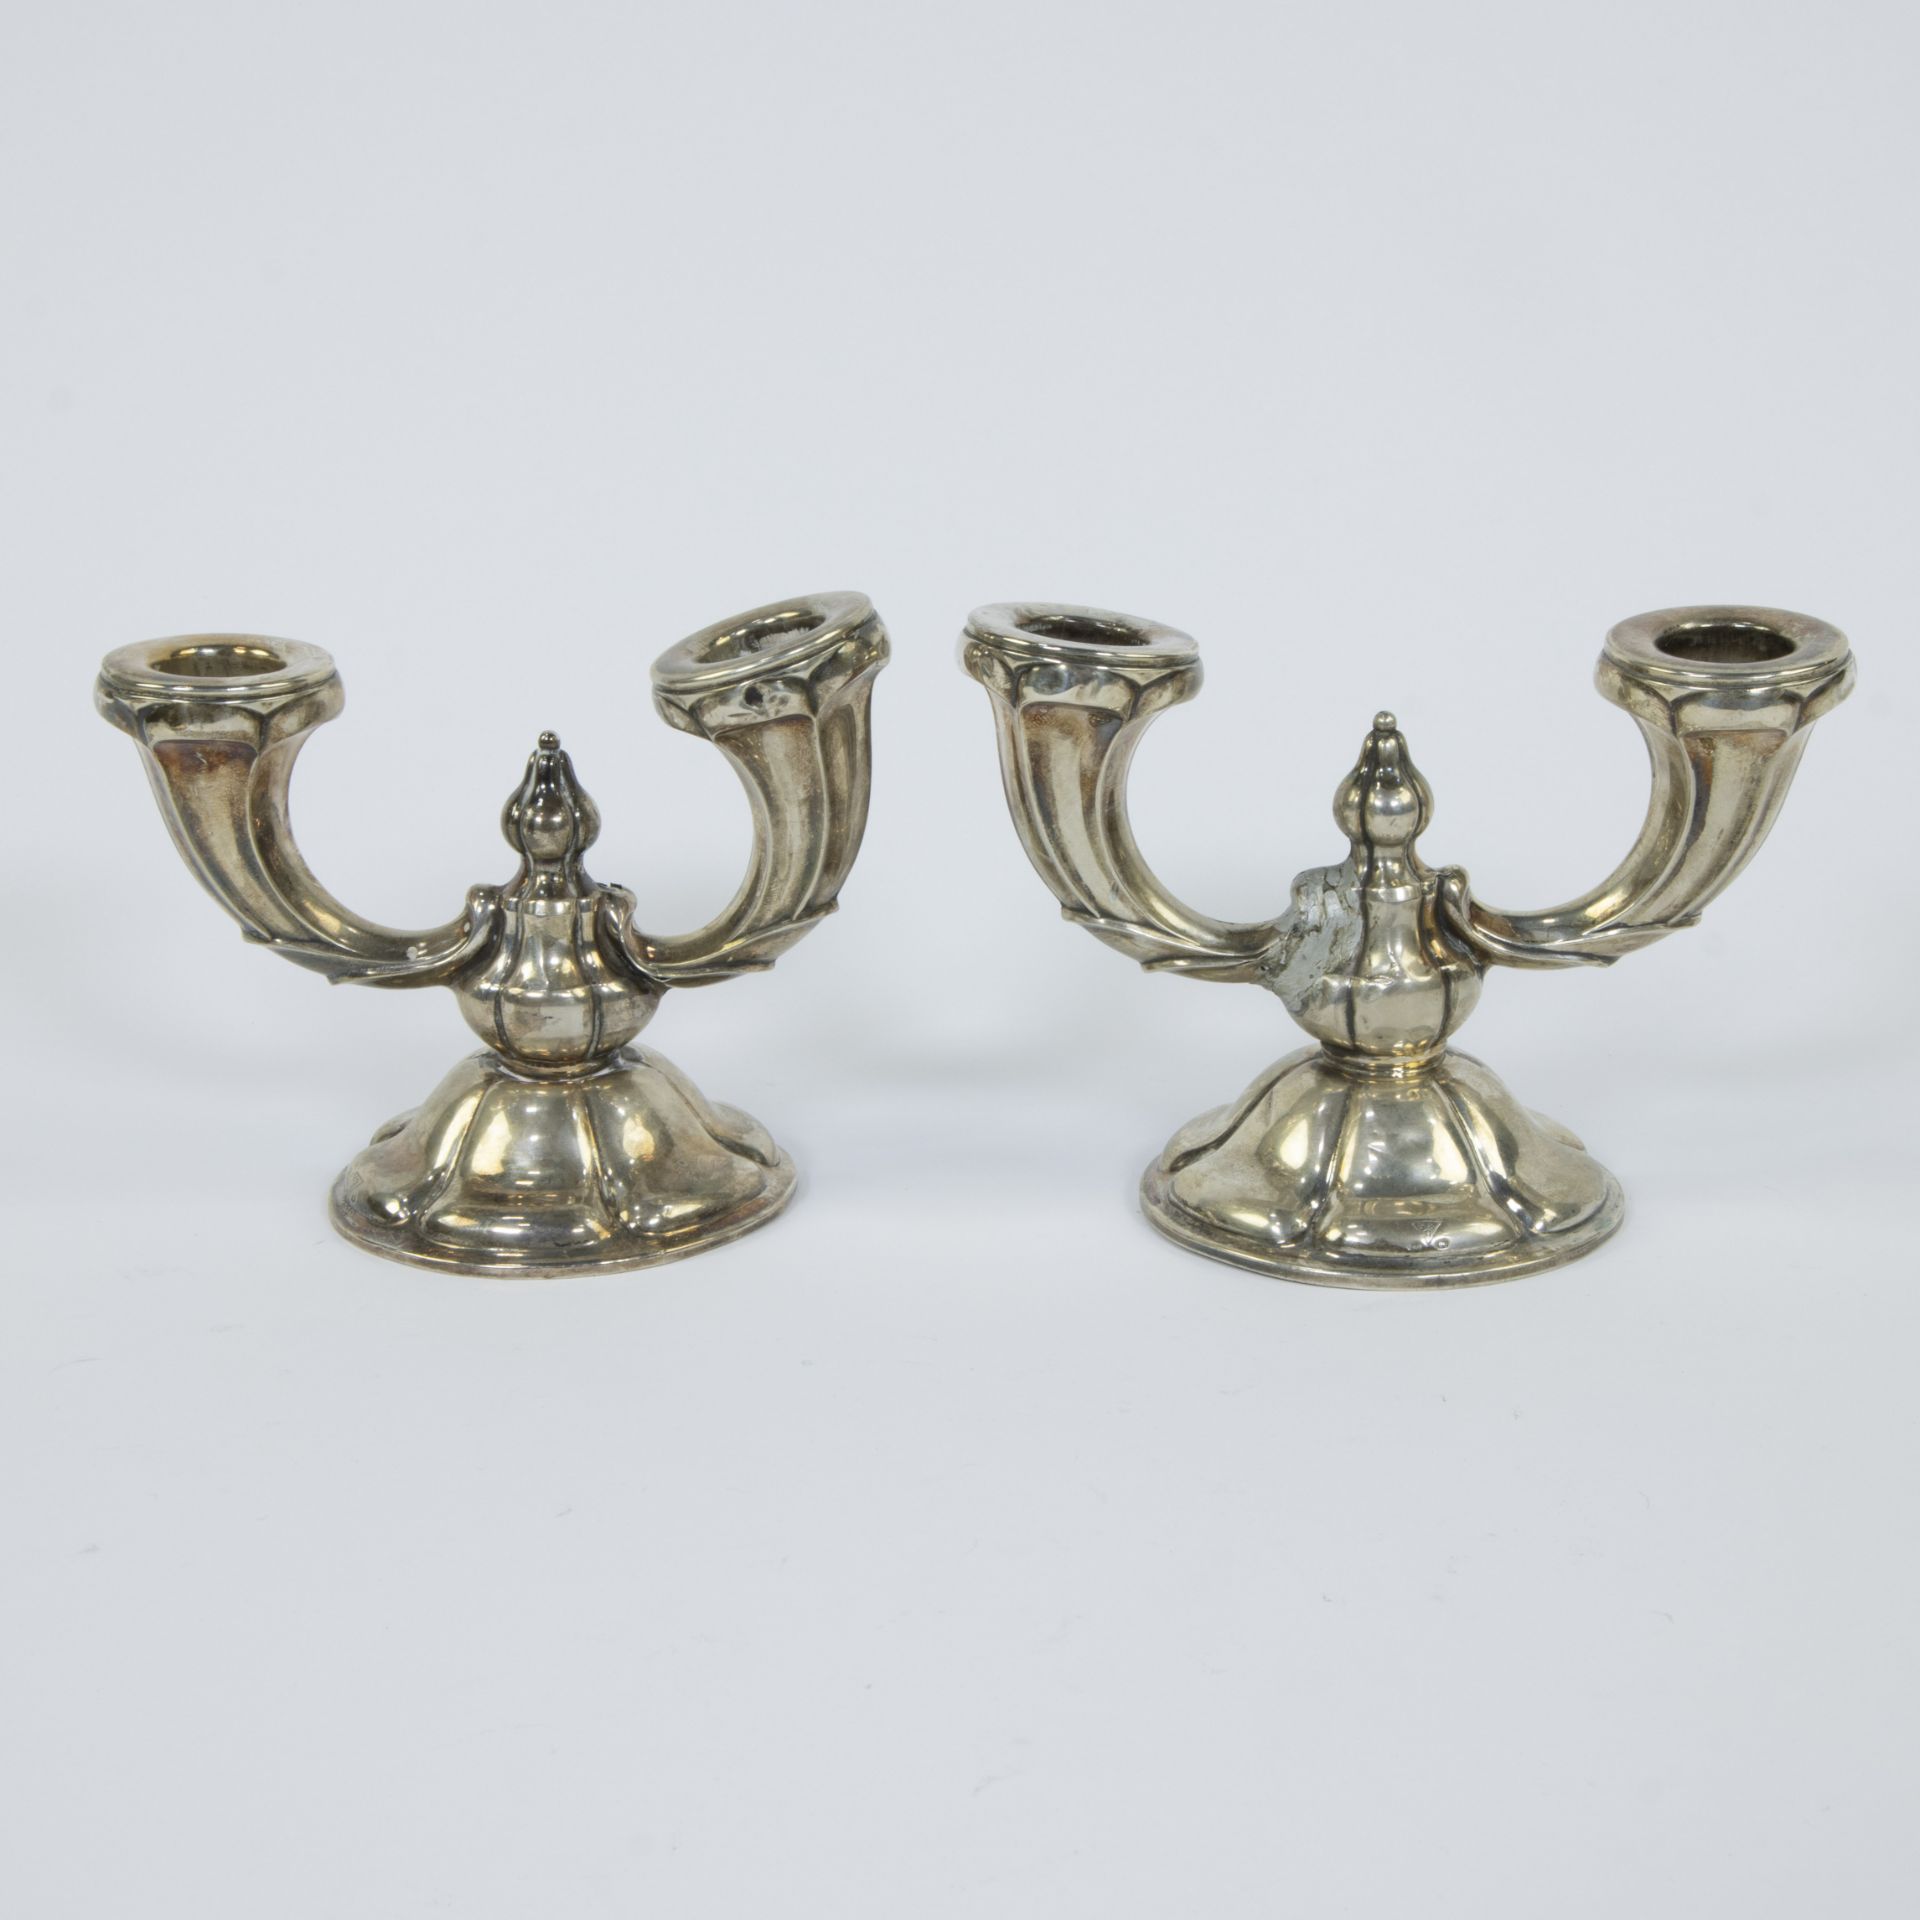 Silver lot, tray (Elite racing 1973) silver 925 and pair of candlesticks silver 830 - Image 2 of 7